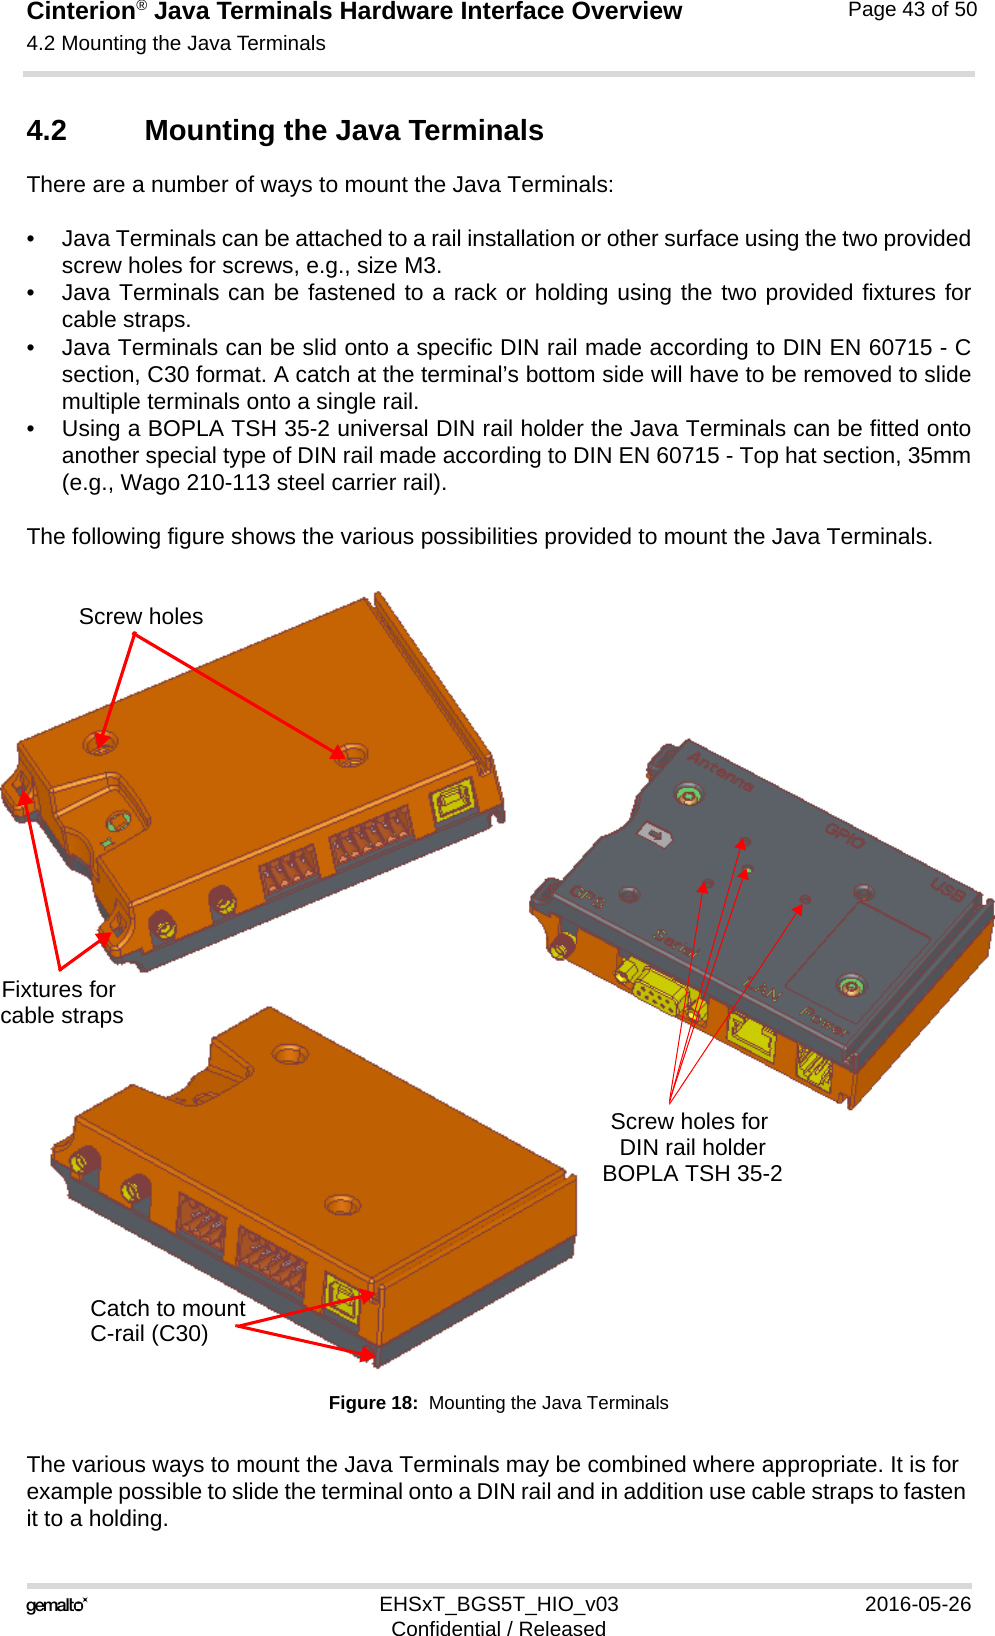 Cinterion® Java Terminals Hardware Interface Overview4.2 Mounting the Java Terminals44EHSxT_BGS5T_HIO_v03 2016-05-26Confidential / ReleasedPage 43 of 504.2 Mounting the Java TerminalsThere are a number of ways to mount the Java Terminals: • Java Terminals can be attached to a rail installation or other surface using the two providedscrew holes for screws, e.g., size M3. • Java Terminals can be fastened to a rack or holding using the two provided fixtures forcable straps.• Java Terminals can be slid onto a specific DIN rail made according to DIN EN 60715 - Csection, C30 format. A catch at the terminal’s bottom side will have to be removed to slidemultiple terminals onto a single rail.• Using a BOPLA TSH 35-2 universal DIN rail holder the Java Terminals can be fitted ontoanother special type of DIN rail made according to DIN EN 60715 - Top hat section, 35mm(e.g., Wago 210-113 steel carrier rail).The following figure shows the various possibilities provided to mount the Java Terminals.Figure 18:  Mounting the Java TerminalsThe various ways to mount the Java Terminals may be combined where appropriate. It is for example possible to slide the terminal onto a DIN rail and in addition use cable straps to fasten it to a holding.Catch to mountScrew holes for Screw holesFixtures for cable strapsDIN rail holderC-rail (C30)BOPLA TSH 35-2